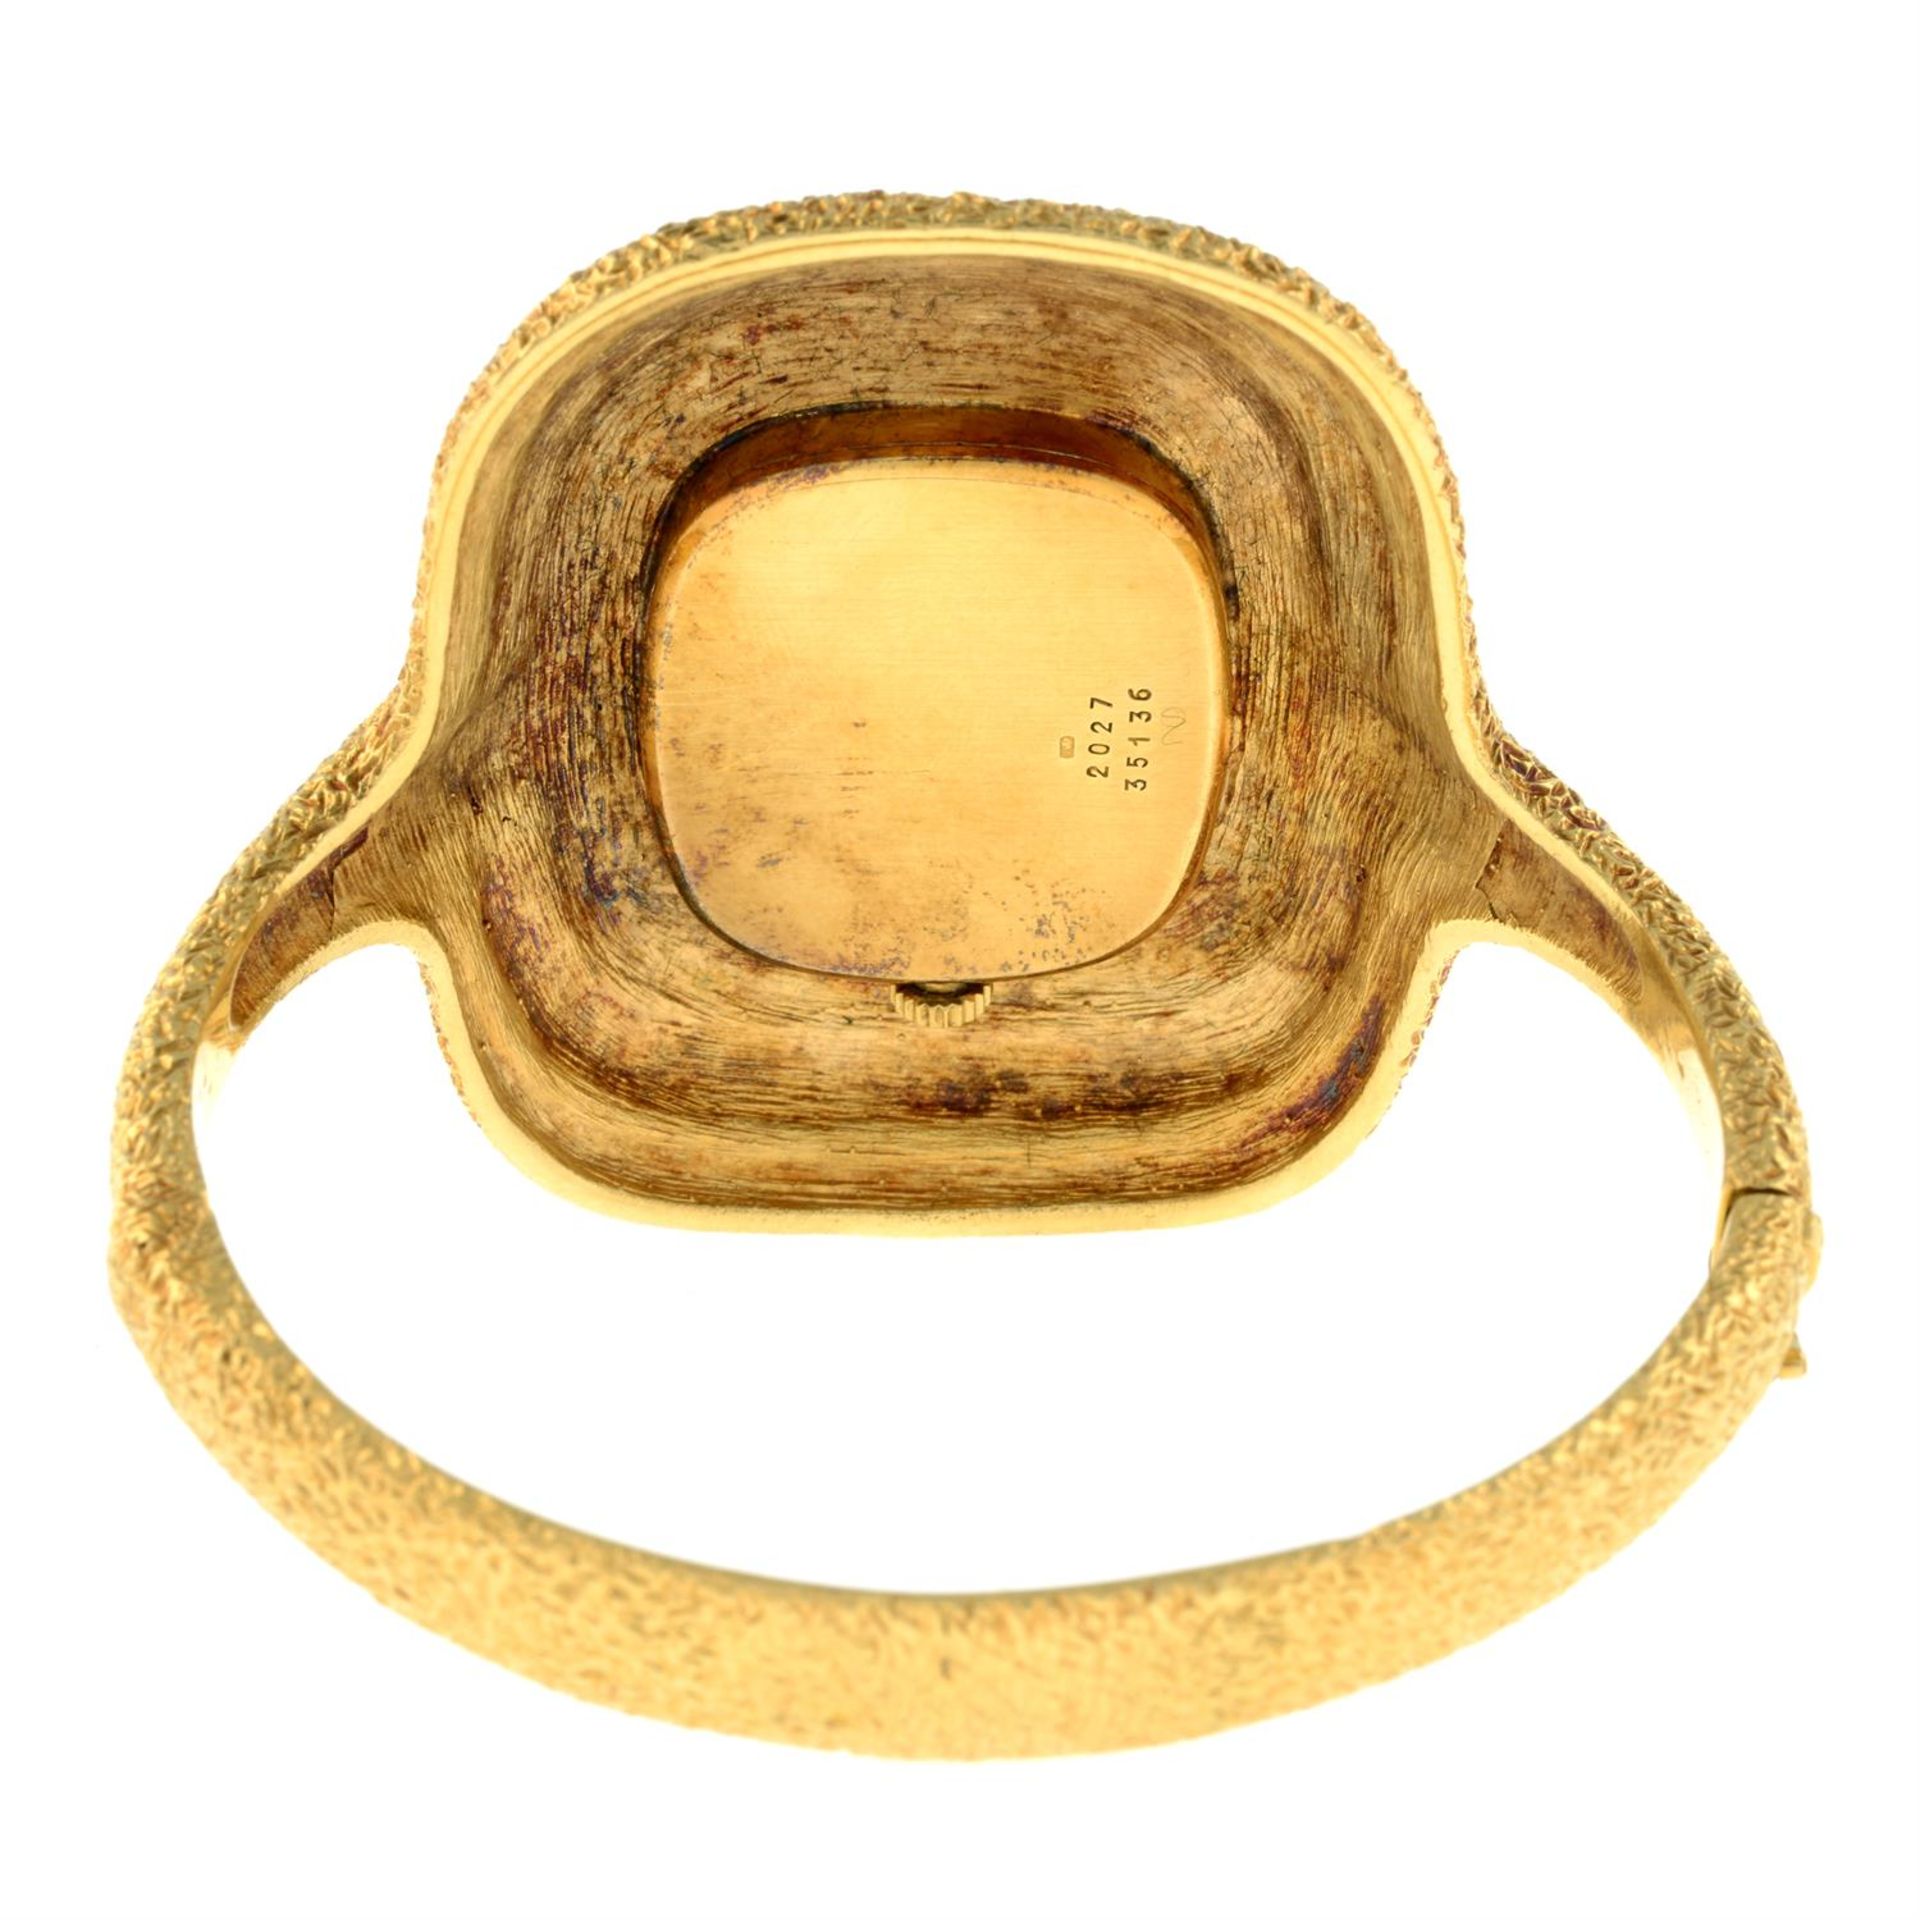 A 1970s 18ct gold watch bangle, with textured surrounds, by Chopard. - Image 3 of 4